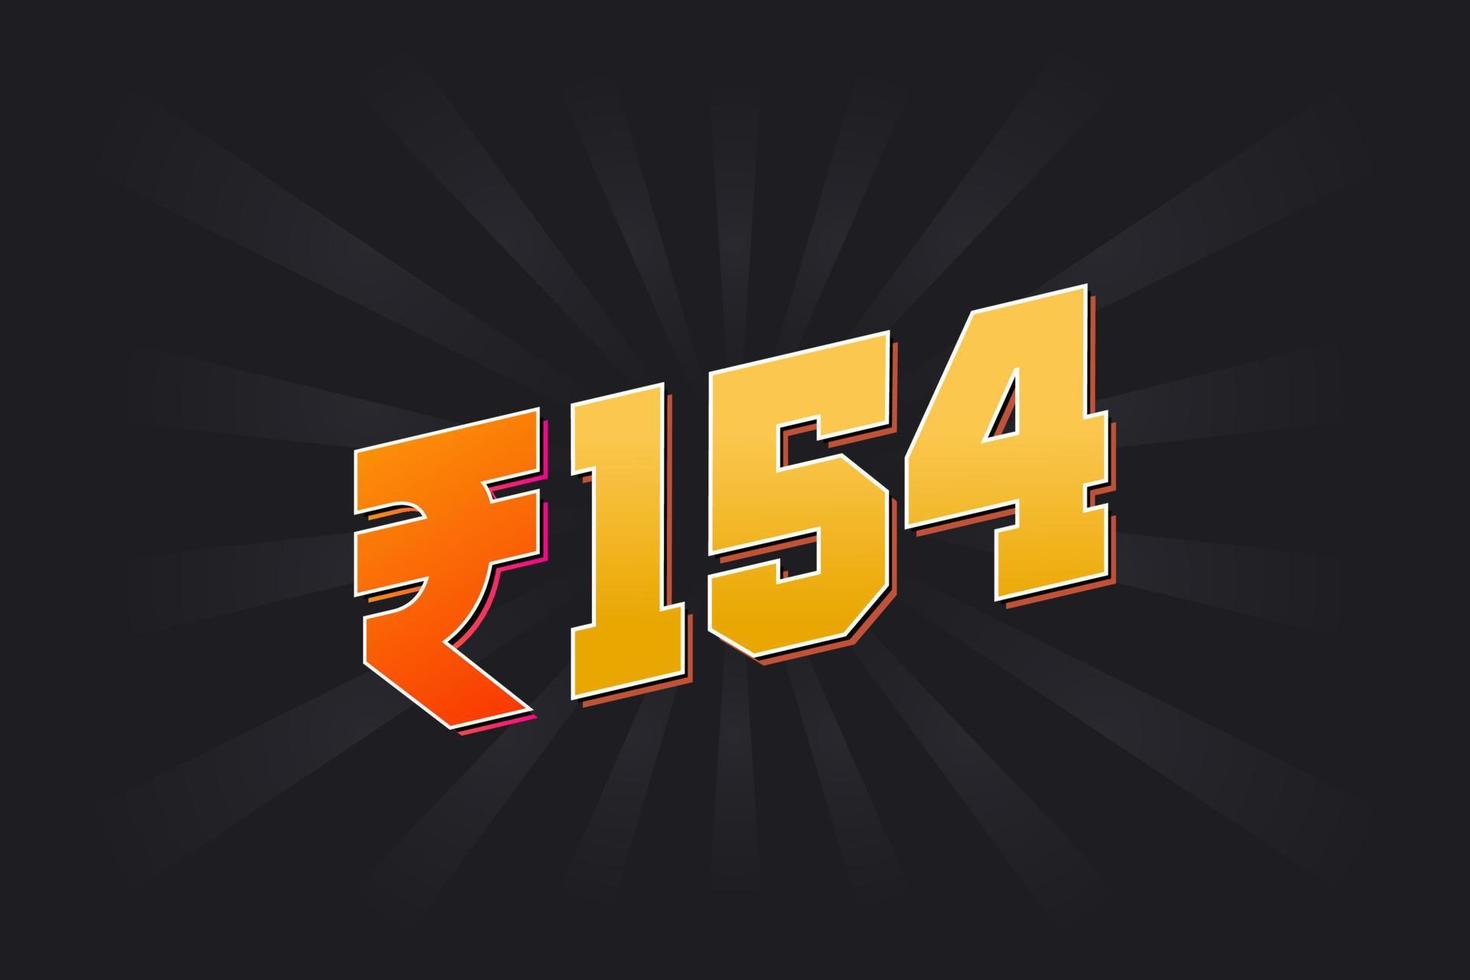 154 Indian Rupee vector currency image. 154 Rupee symbol bold text vector illustration